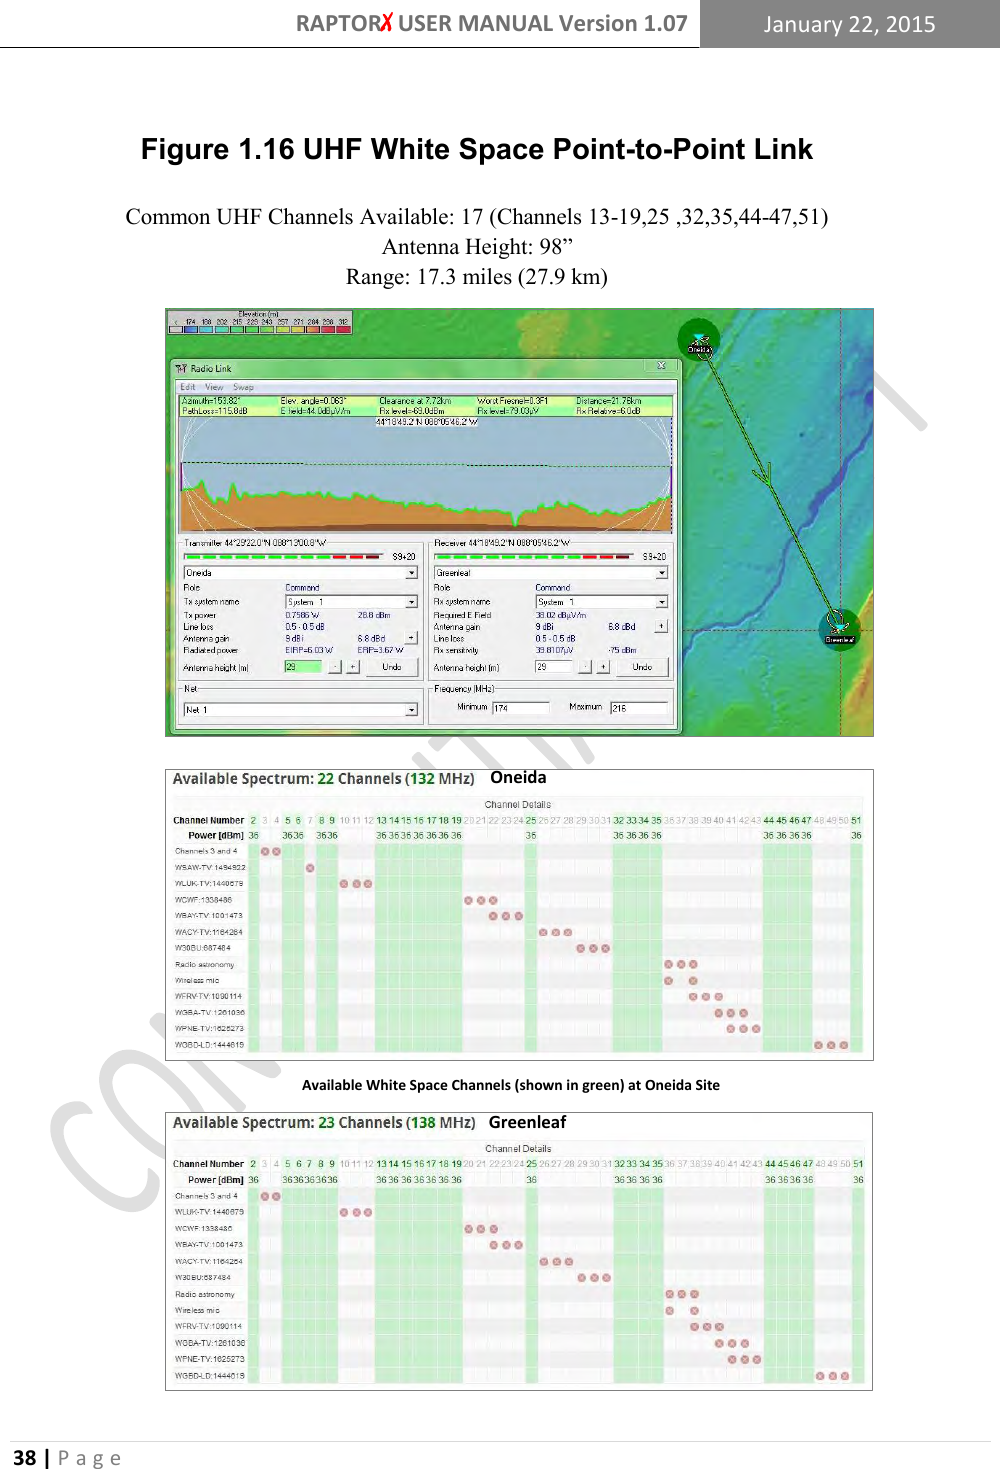 RAPTORX USER MANUAL Version 1.07 January 22, 2015  38 | P a g e                            OneidaGreenleafAvailable White Space Channels (shown in green) at Oneida SiteAvailable White Space Channels (shown in green) at Greenleaf Site Figure 1.16 UHF White Space Point-to-Point Link Common UHF Channels Available: 17 (Channels 13-19,25 ,32,35,44-47,51) Antenna Height: 98” Range: 17.3 miles (27.9 km) EIRP: 36 dBm, Rx Antenna Gain: 15 dBi 